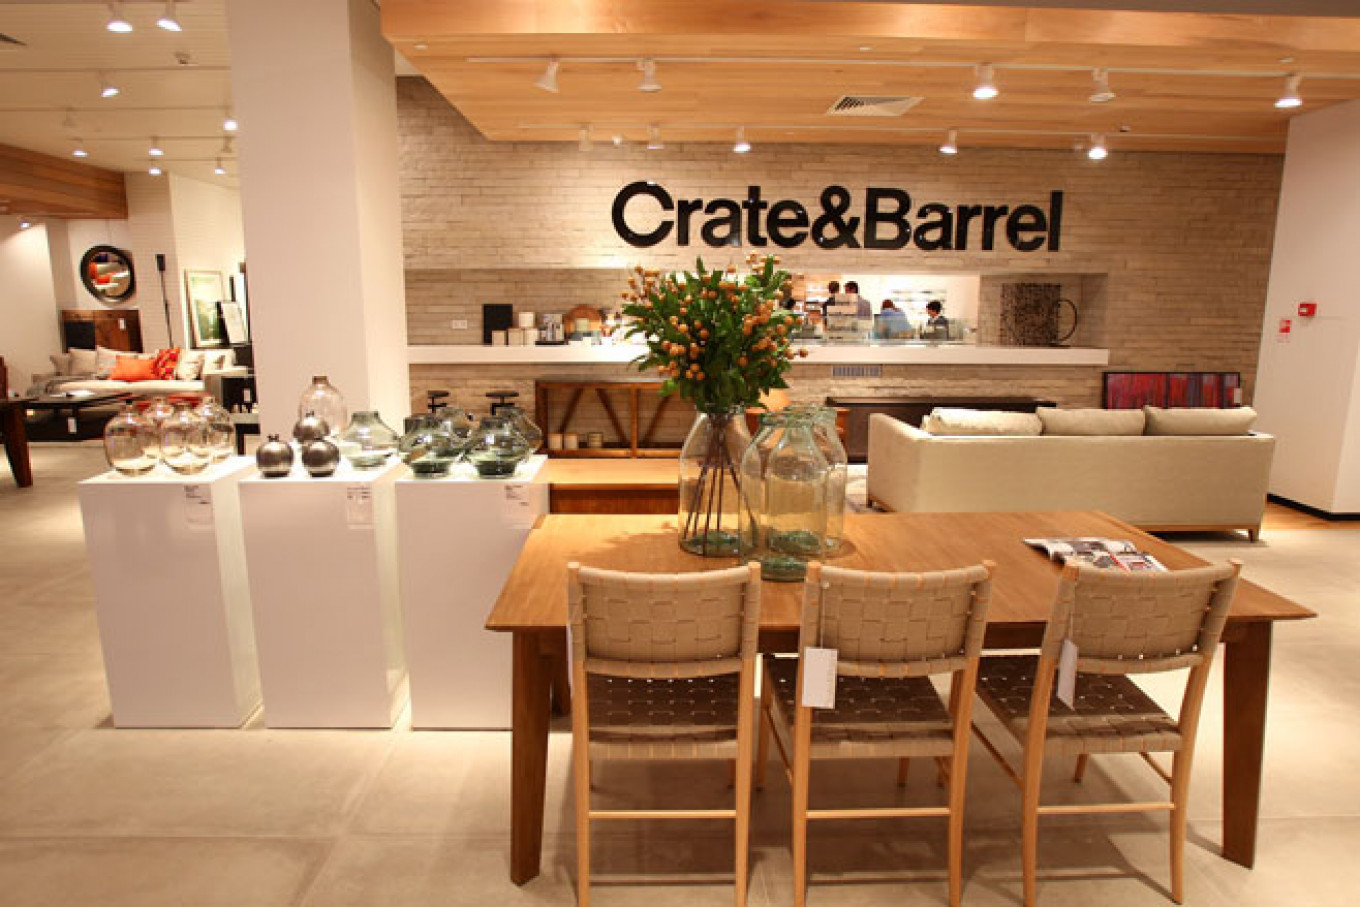  Crate  Barrel  Opens First Store in Russia